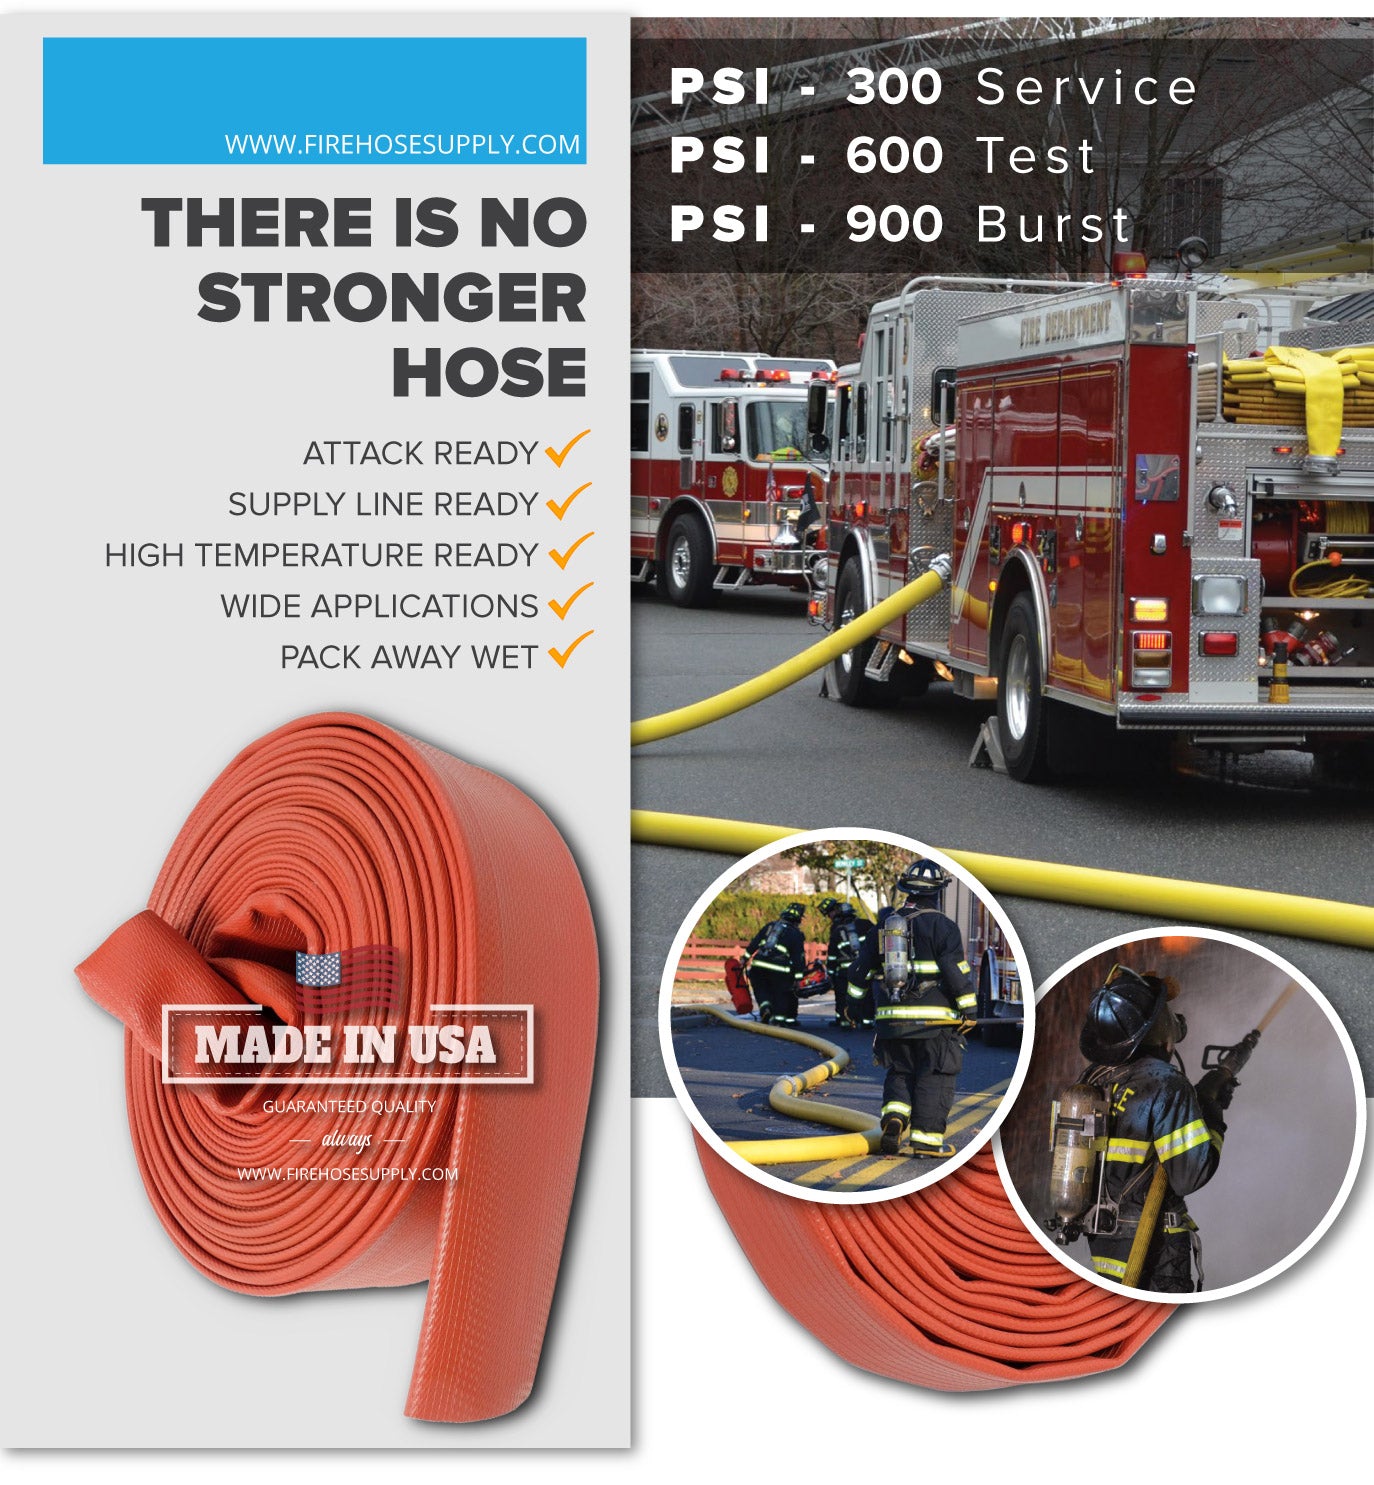 2.5 Inch Rubber Fire Hose Material Only Supply And Attack Ready Firefighter Red 600 PSI Test